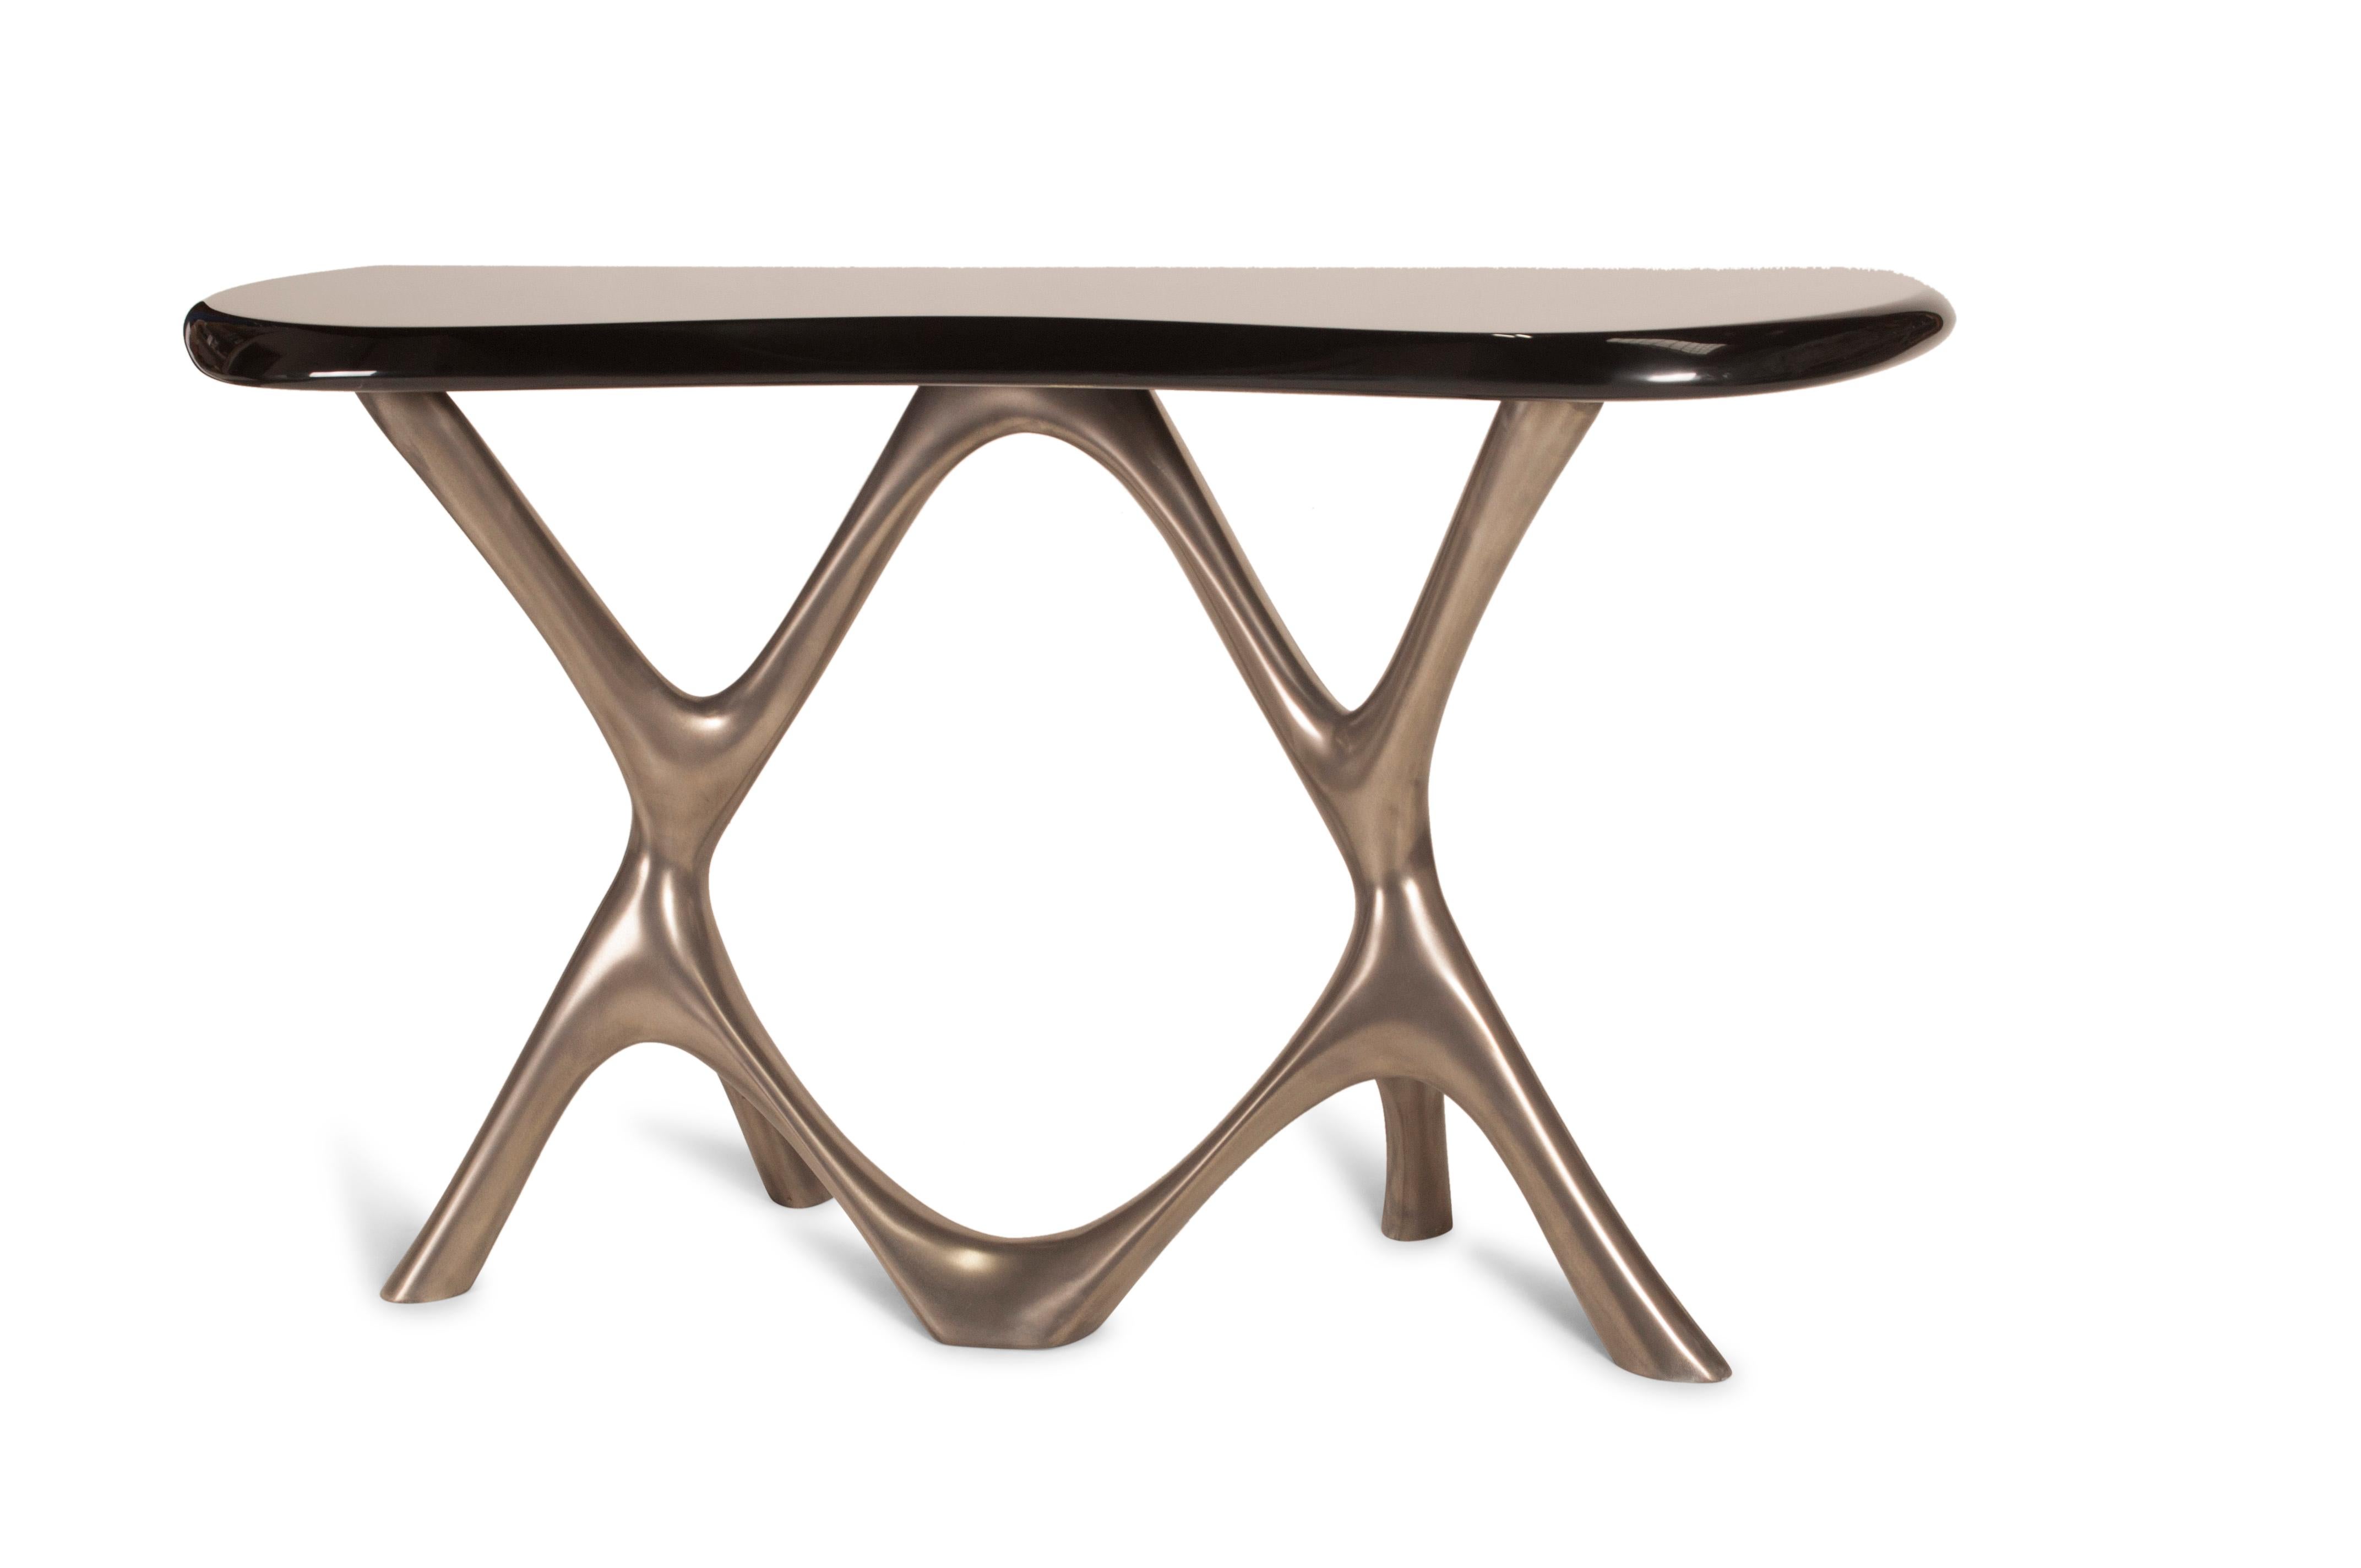 Amorph avatar console table, base: Nickel finish top surface: Glossy black lacquered

About Amorph: 
Amorph is a design and manufacturing company based in Los Angeles, California. We take pride in hand crafted designs connected to technology to